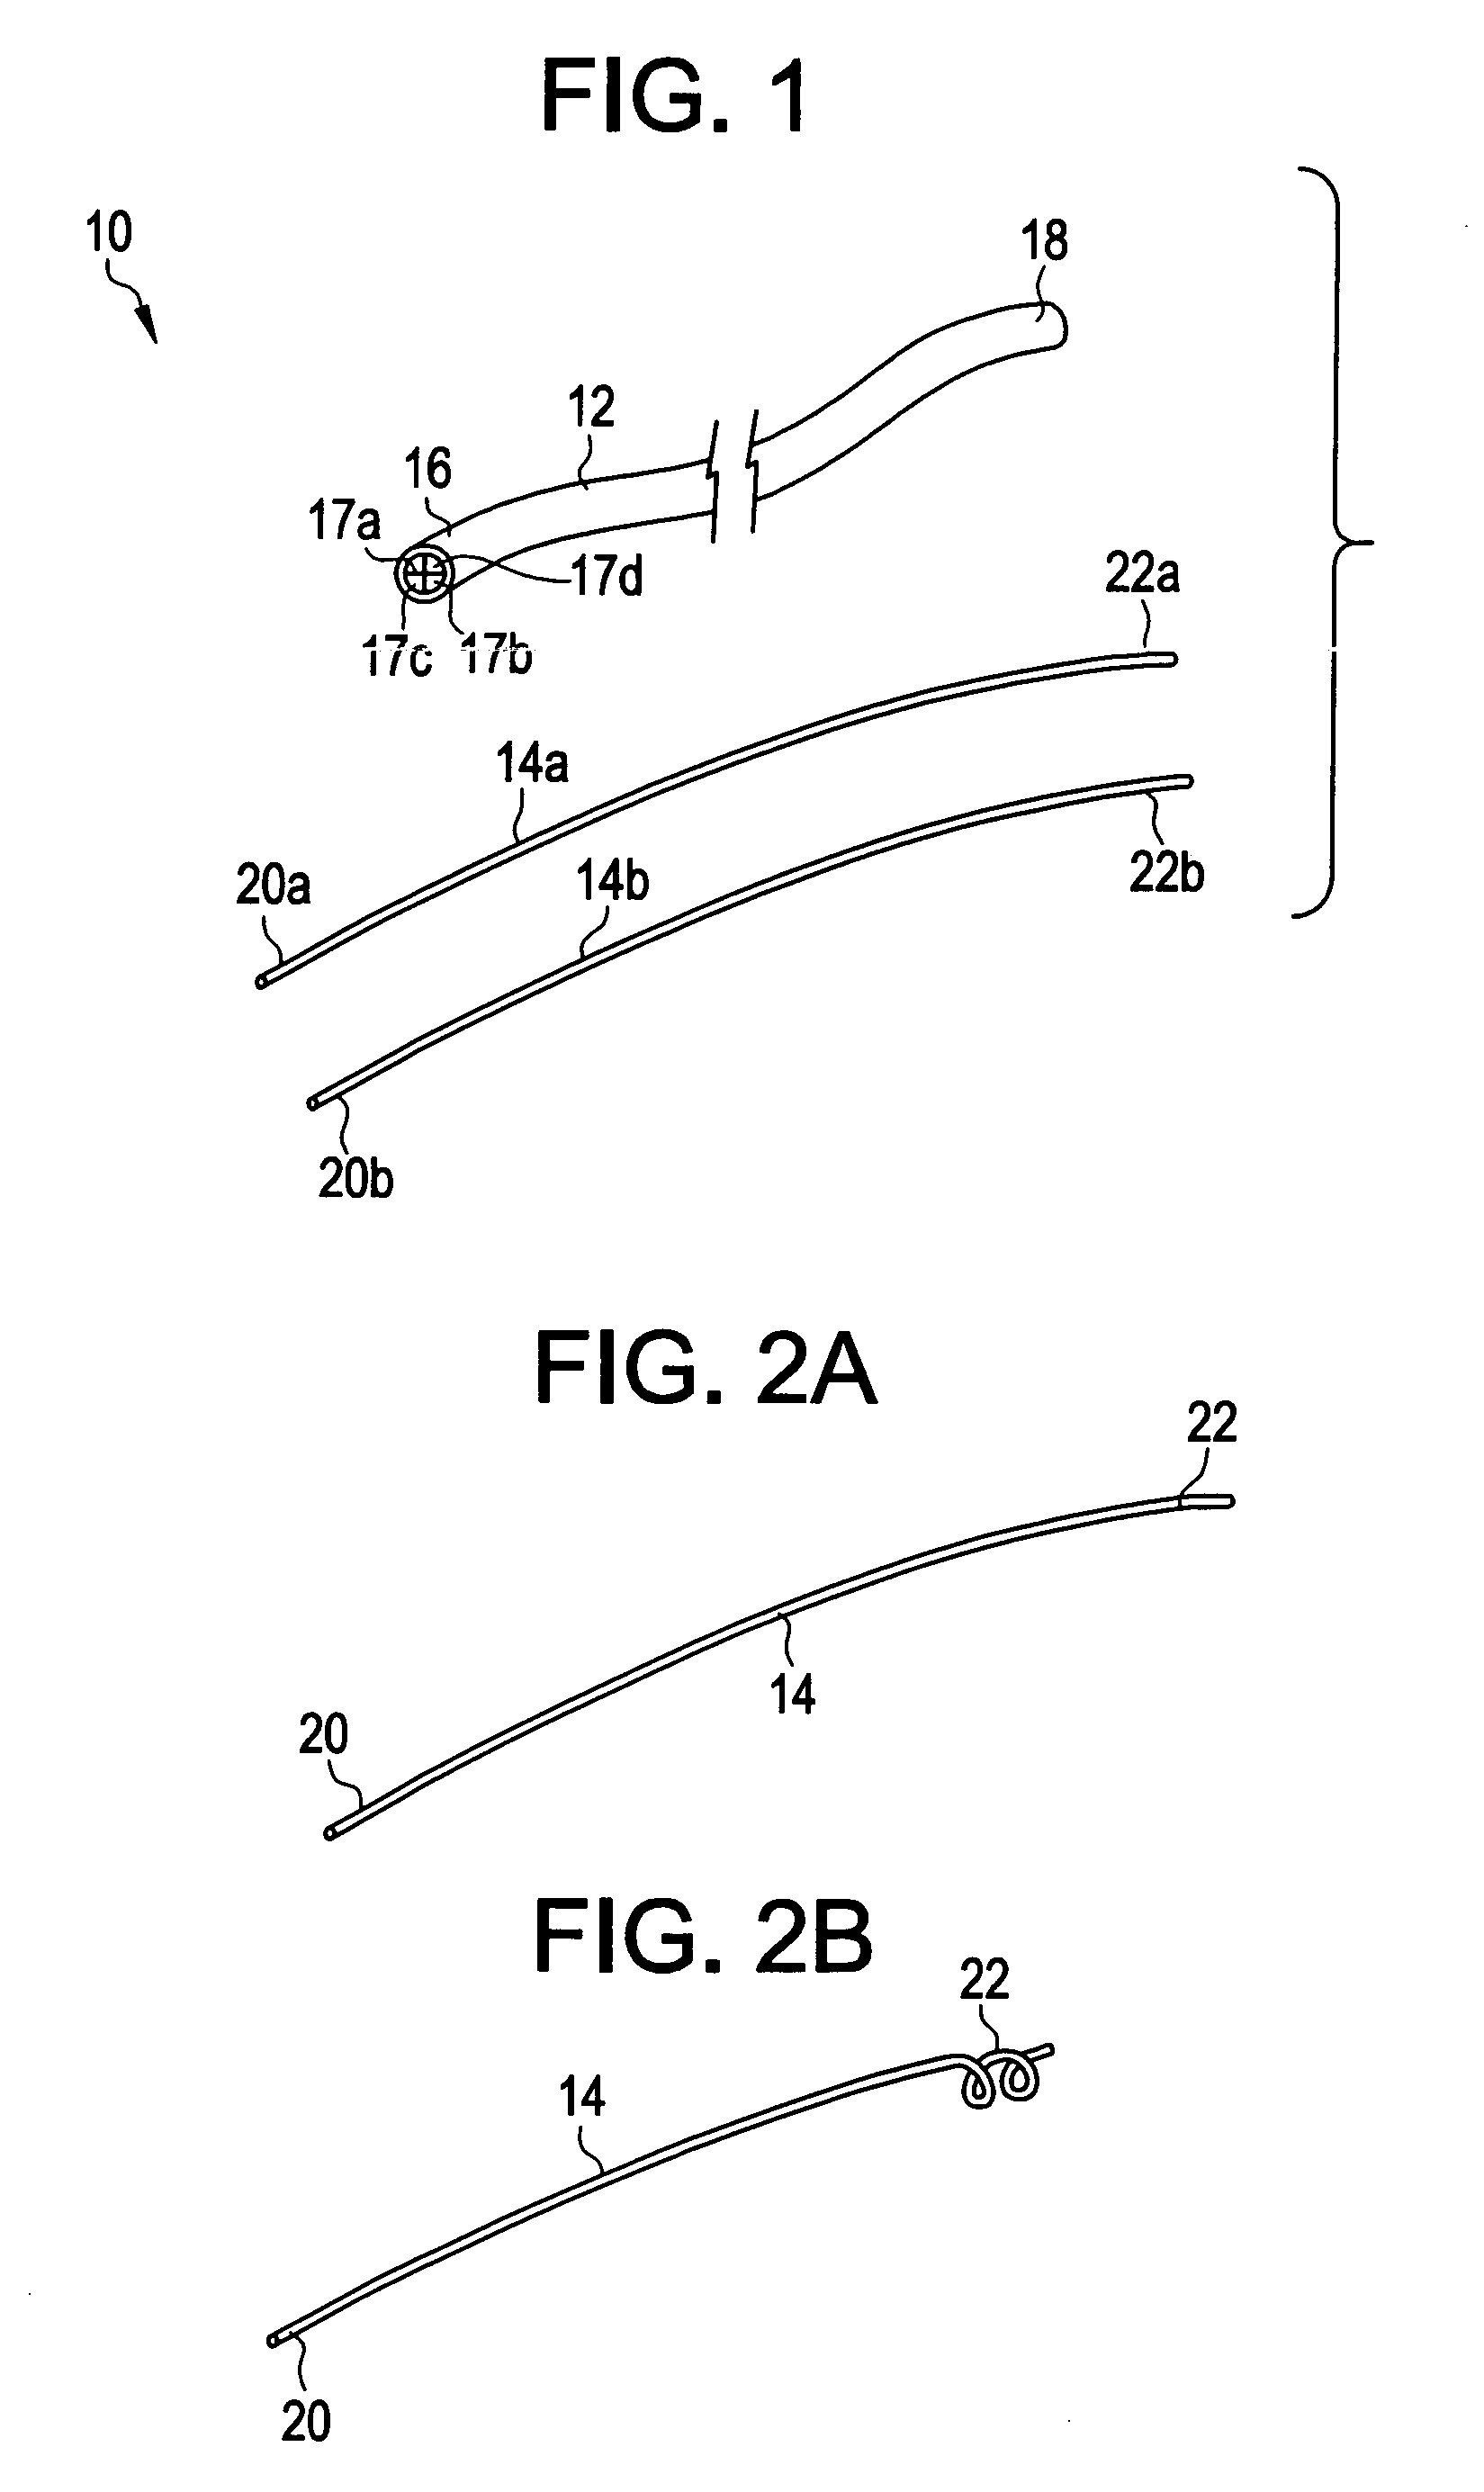 Intravascular device and method for axially stretching blood vessels